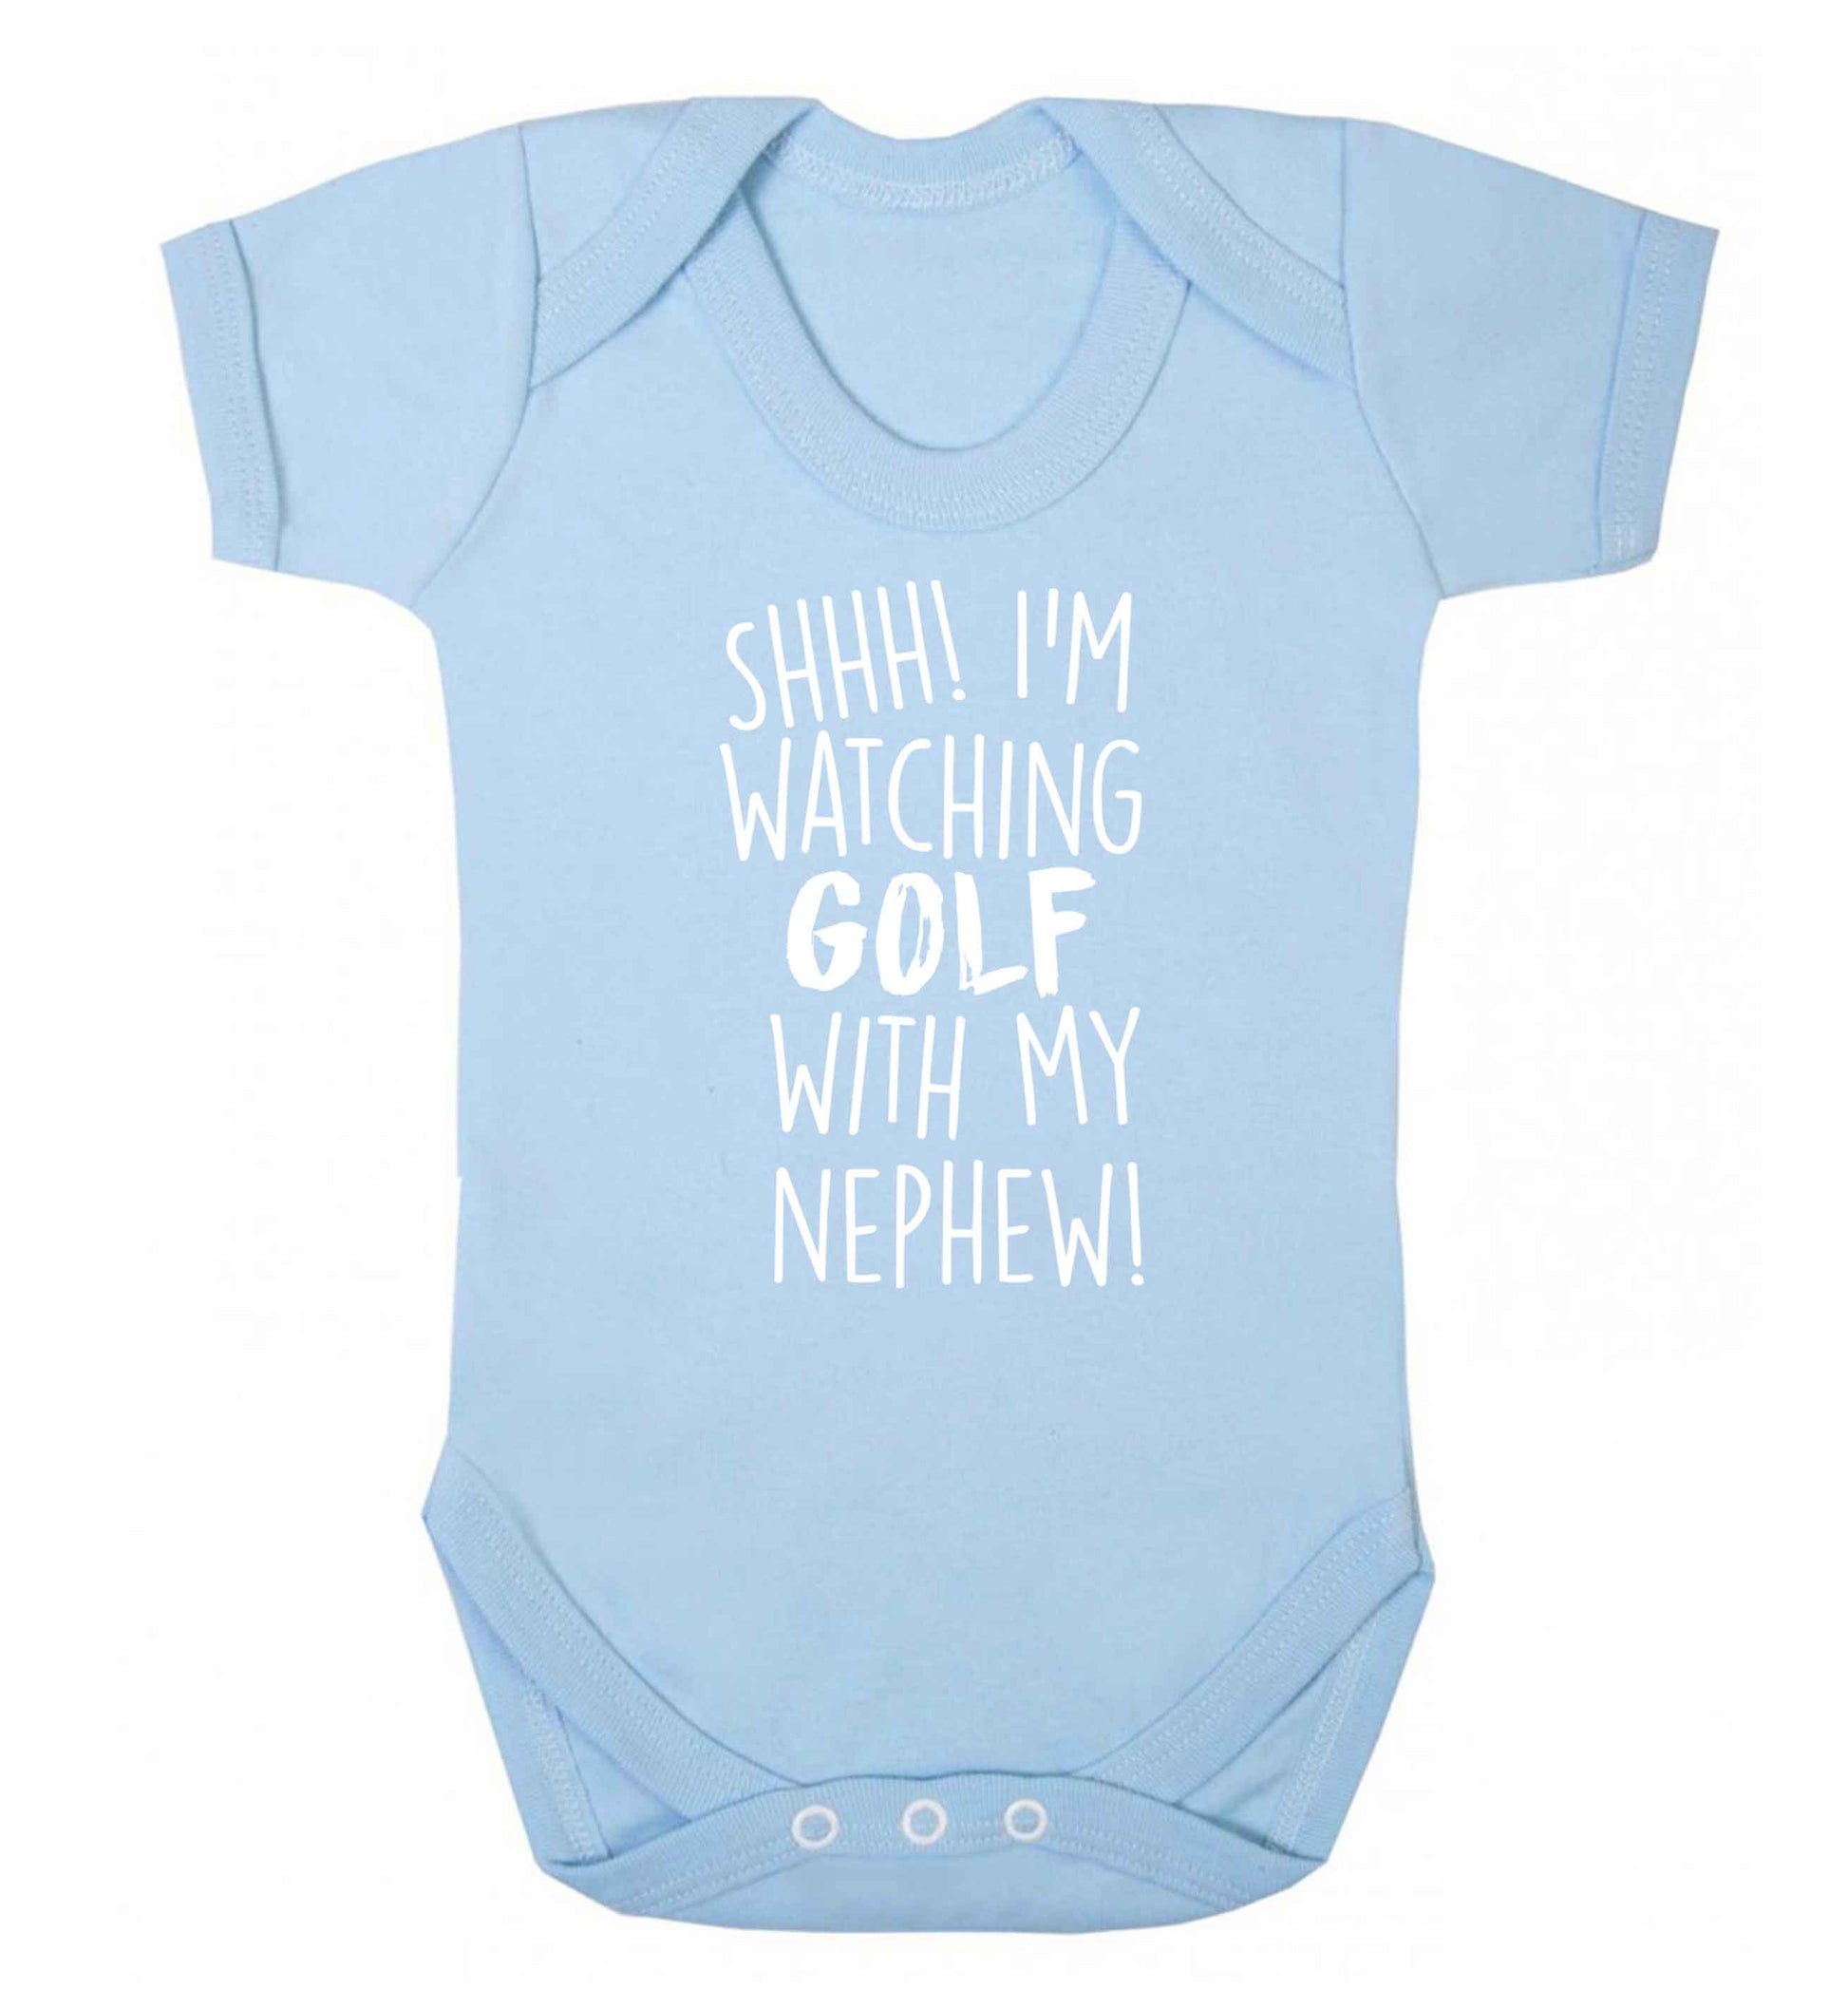 Shh I'm watching golf with my nephew Baby Vest pale blue 18-24 months